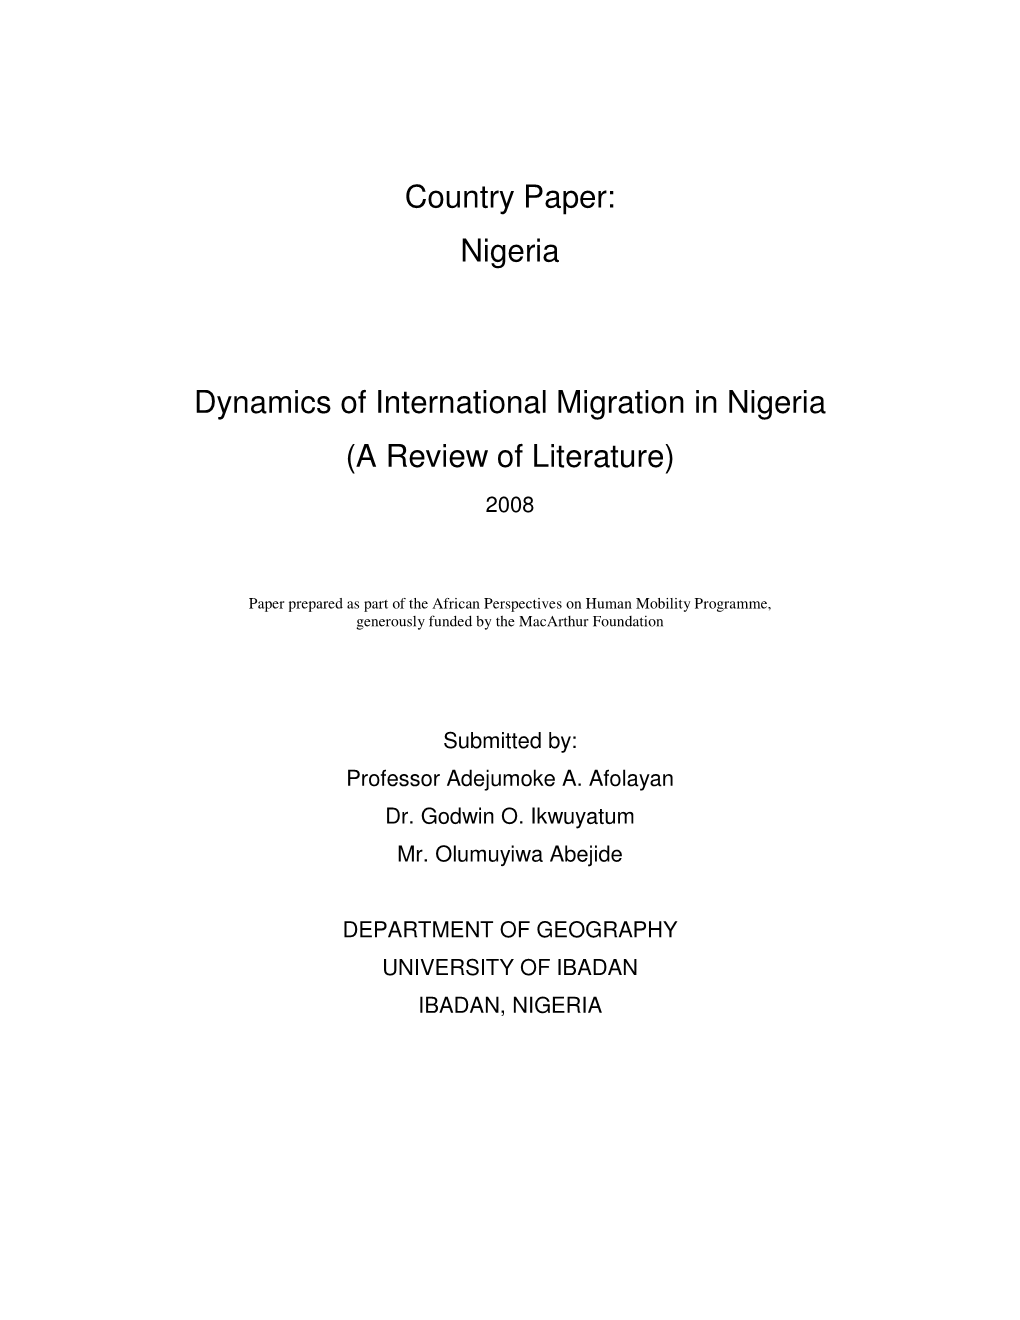 Migration in Nigeria (A Review of Literature) 2008